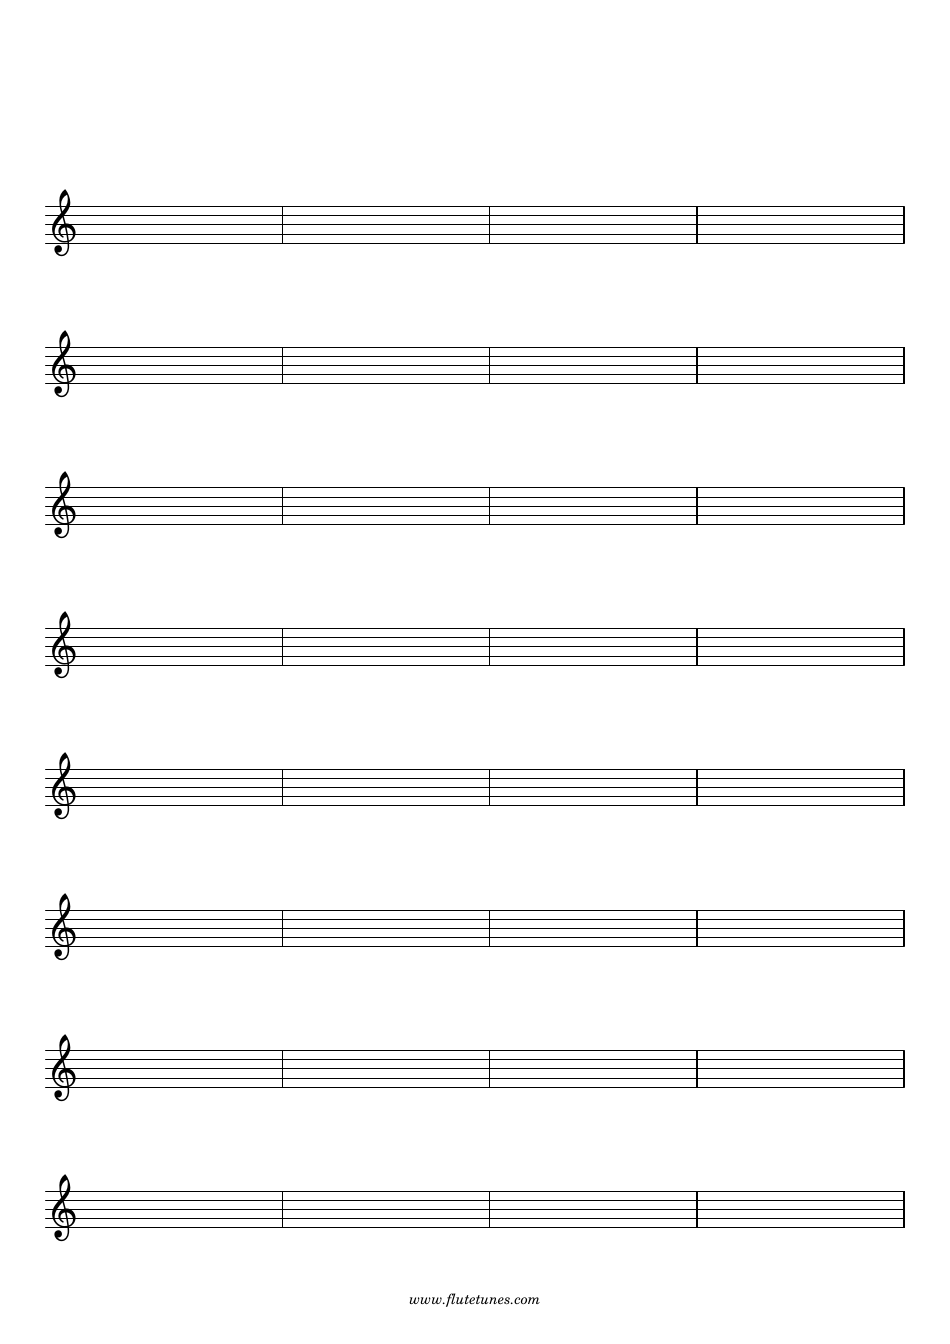 Blank Staff Paper template with 8 staves and 32 bars in treble clef notation